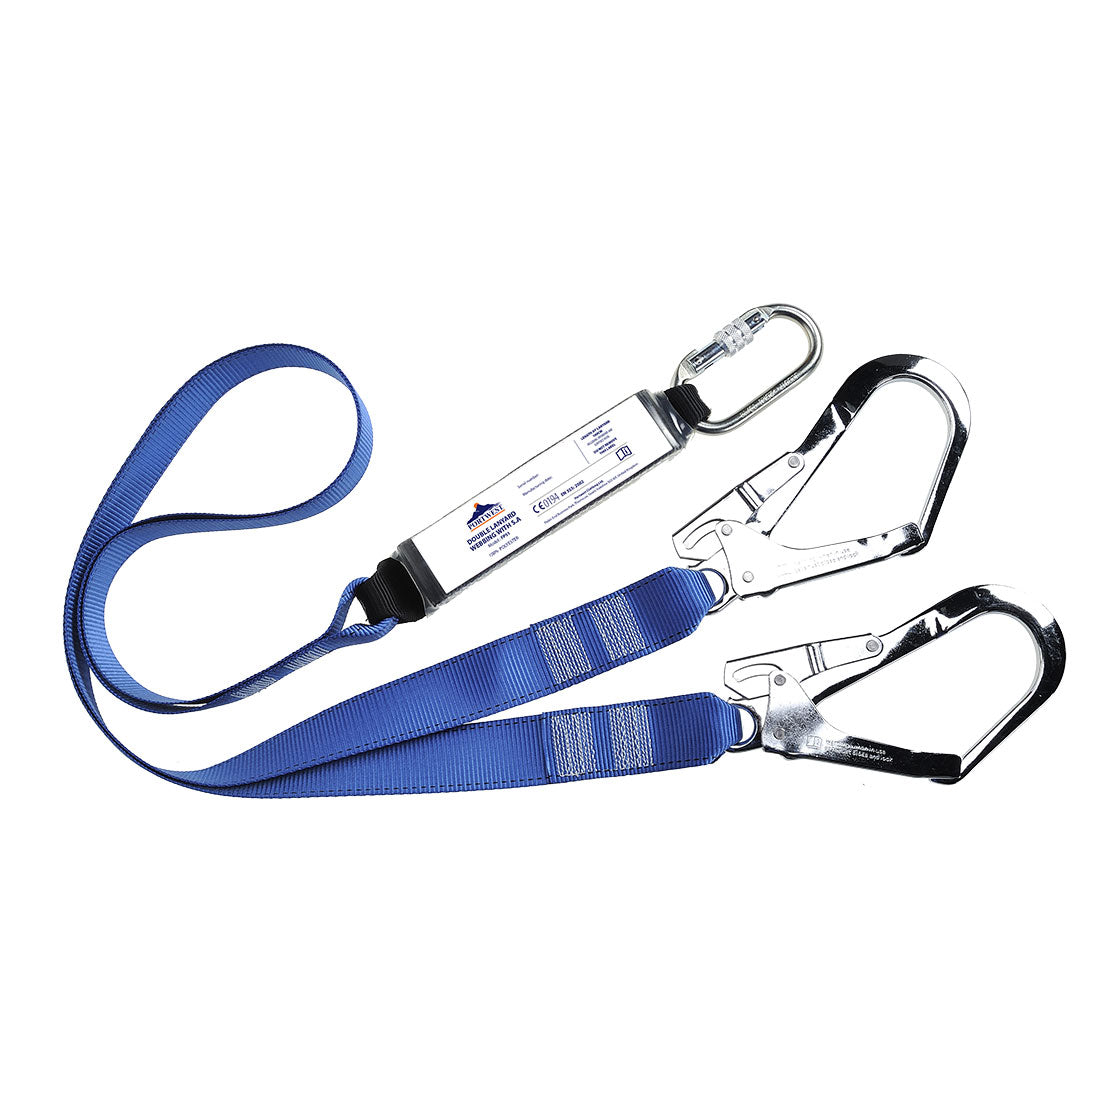 Portwest Double Webbing 1.8m Lanyard With Shock Absorber